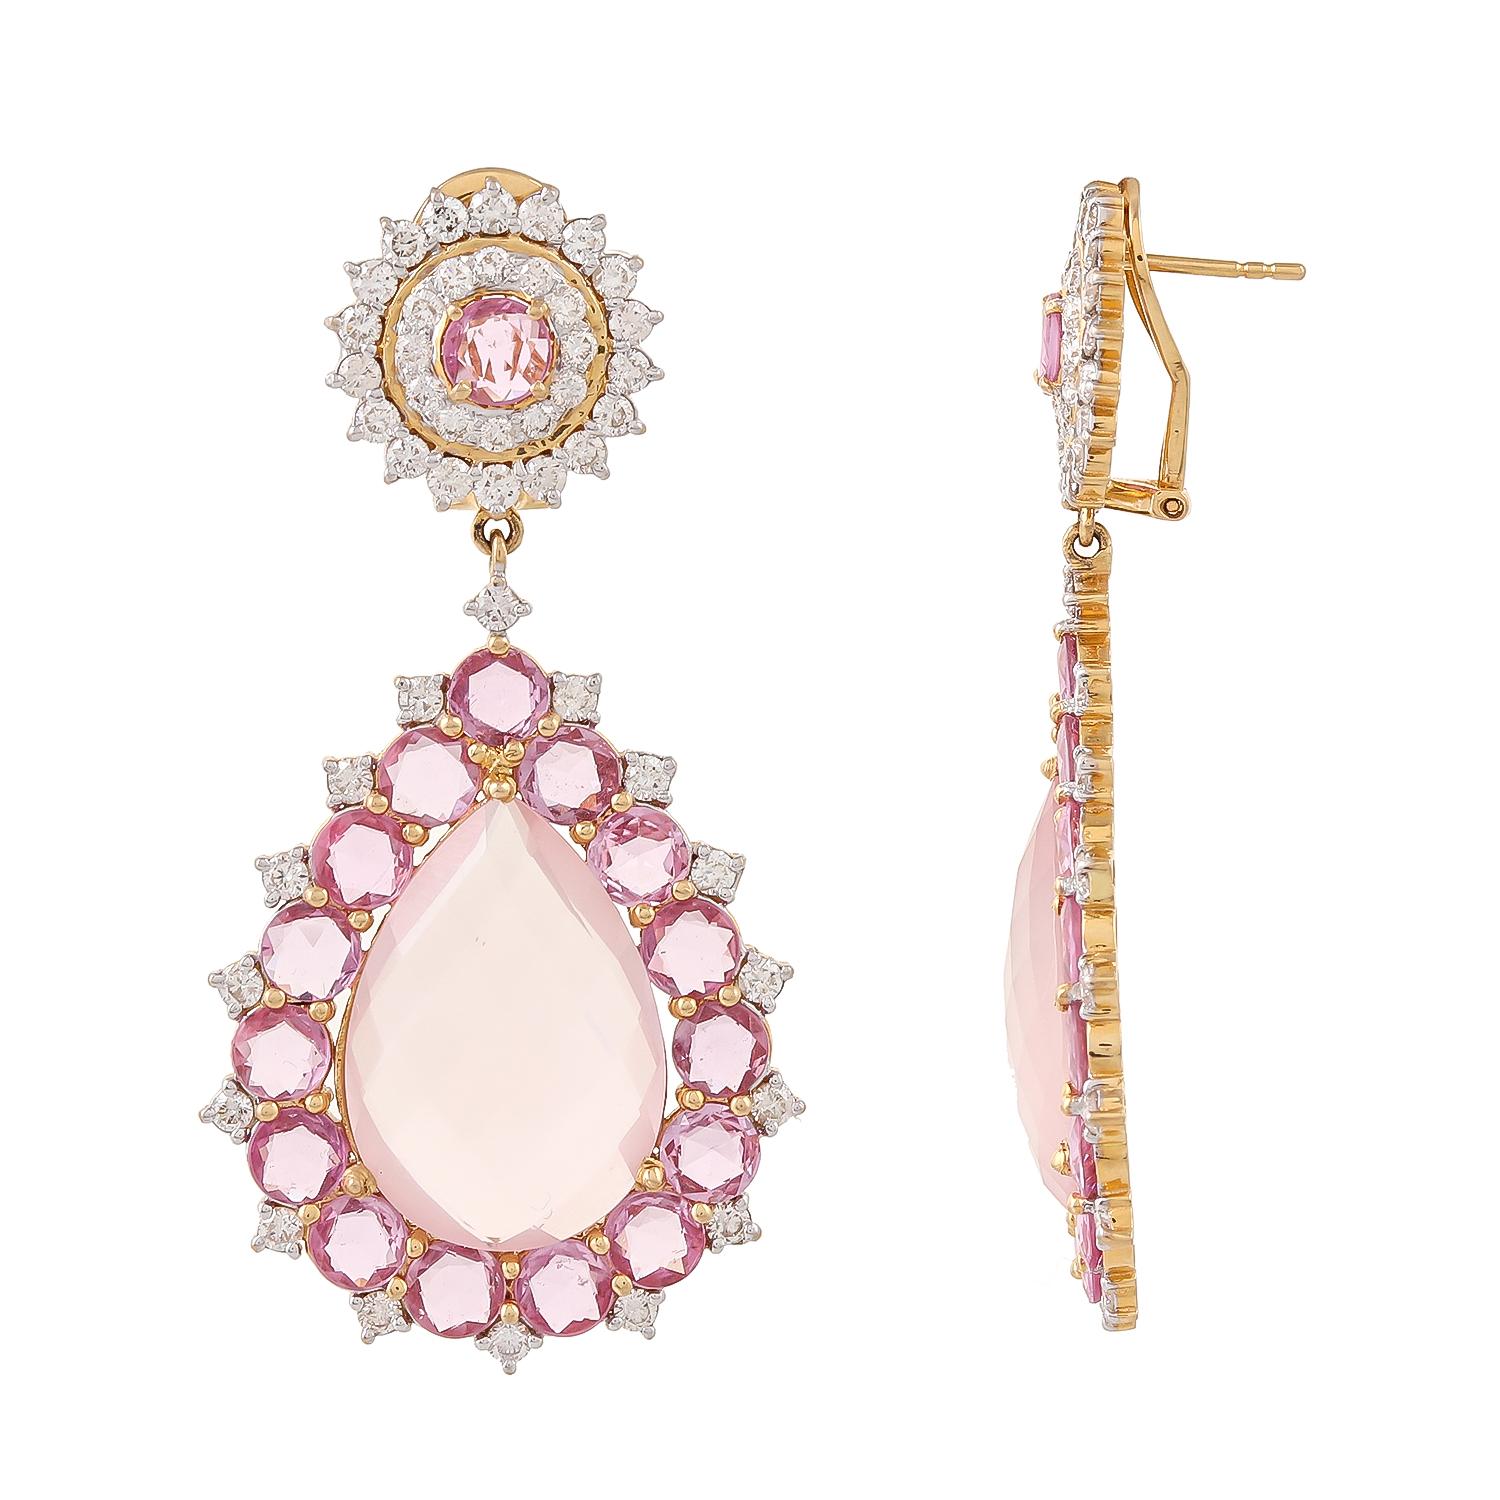 Enchanting Pinks - Rose quartz checker cut teardrop weighing 25.16ct is accented by pink sapphire rose cuts weighing 14.43ct and diamonds with a total diamond weight of 3.73 carats set in 18kt gold to give it a delicate feminine feel.
Art of